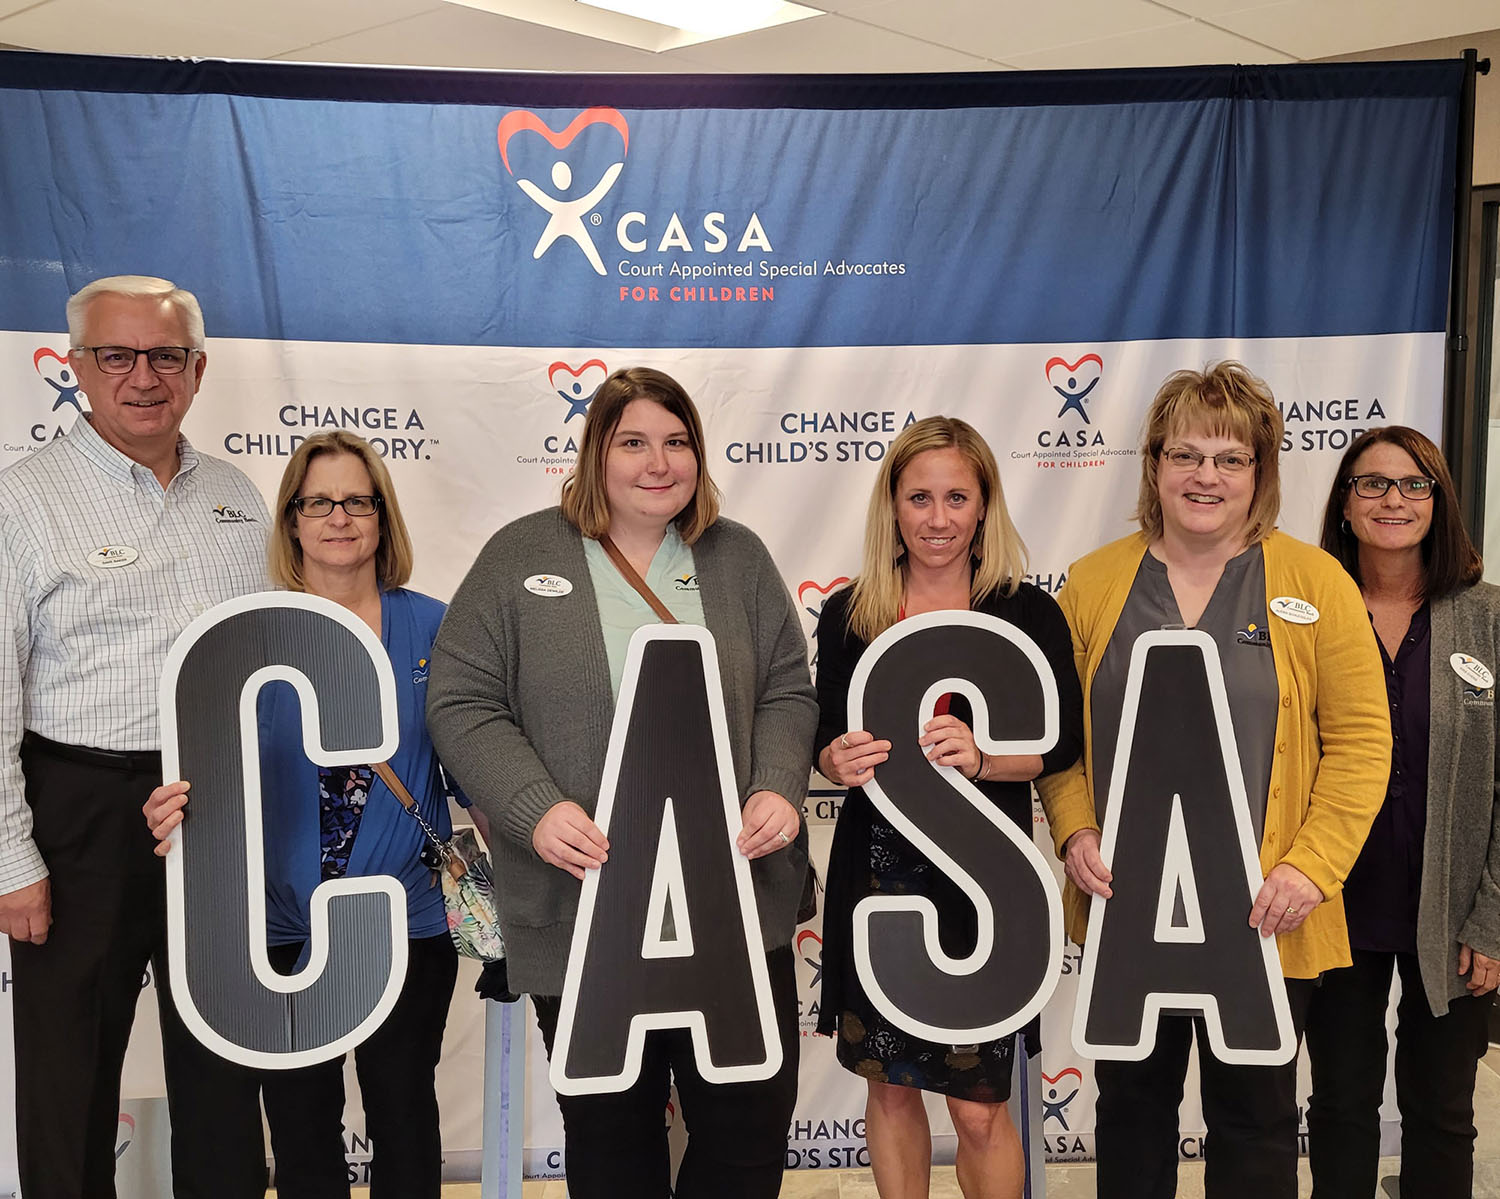 Members of the BLC Team visit CASA to get a tour and learn more about the organization.